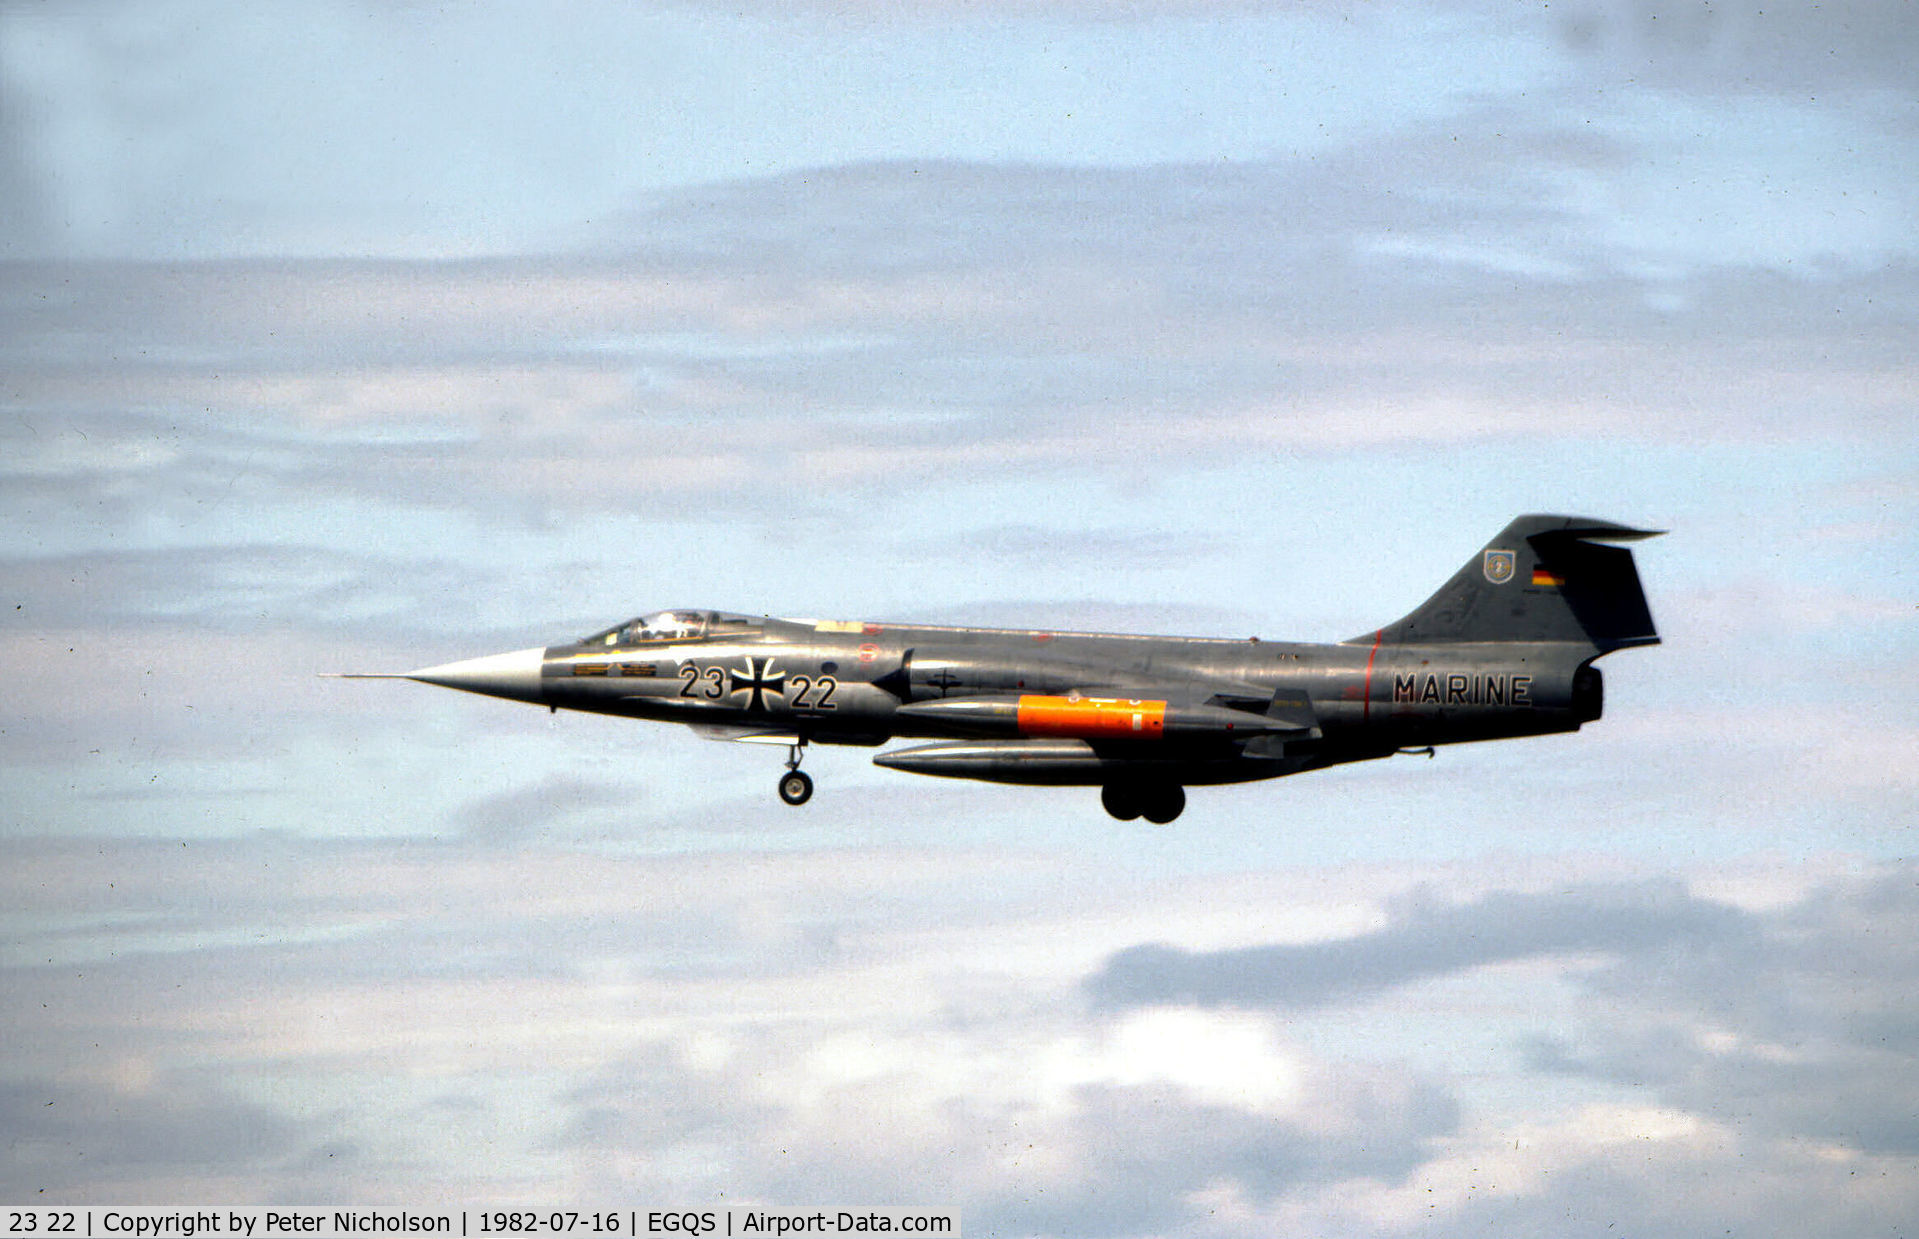 23 22, Lockheed F-104G Starfighter C/N 683-7206, MFG-2 F-104G Starfighter on final approach to RAF Lossiemouth in the Summer of 1982.